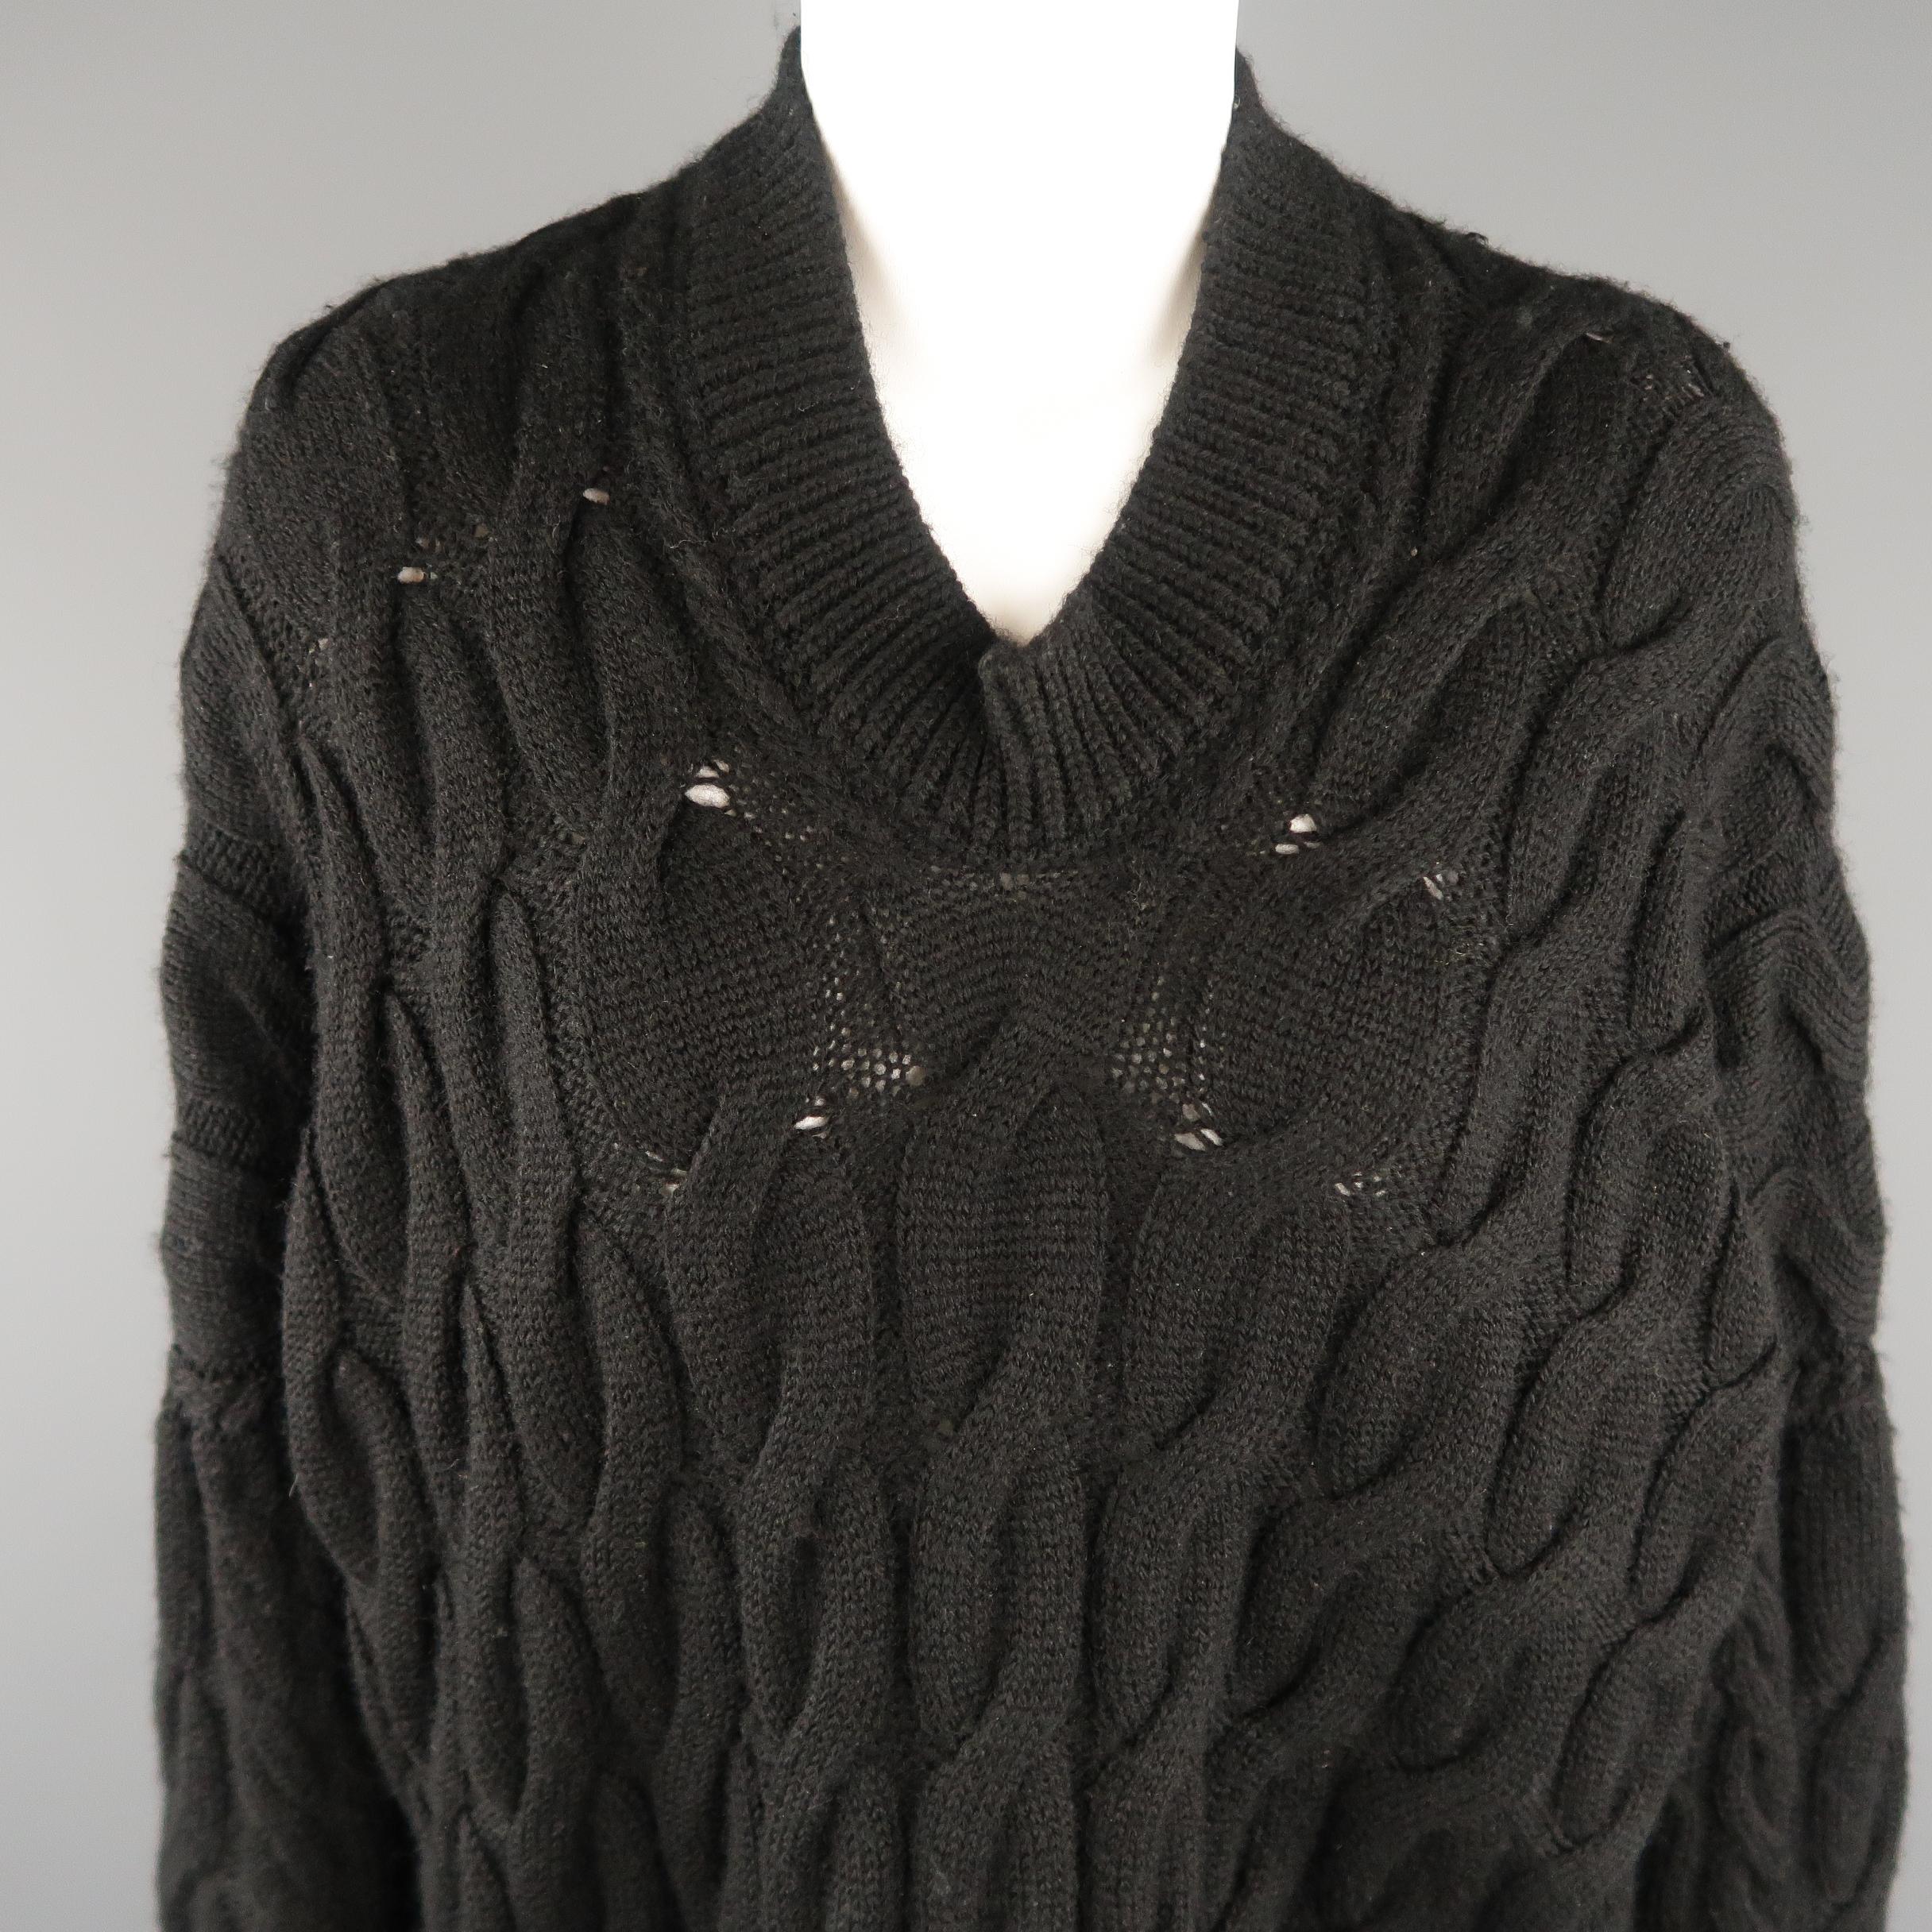 JUNYA WATANABE Comme des Garcons pullover sweater comes in black cable knit wool with an oversized fit, V neck, and drop shoulder. Made in Japan.
 
Good Pre-Owned Condition.
Marked: S
 
Measurements:
 
Shoulder: 34 in.
Bust: 52 in.
Sleeve: 19